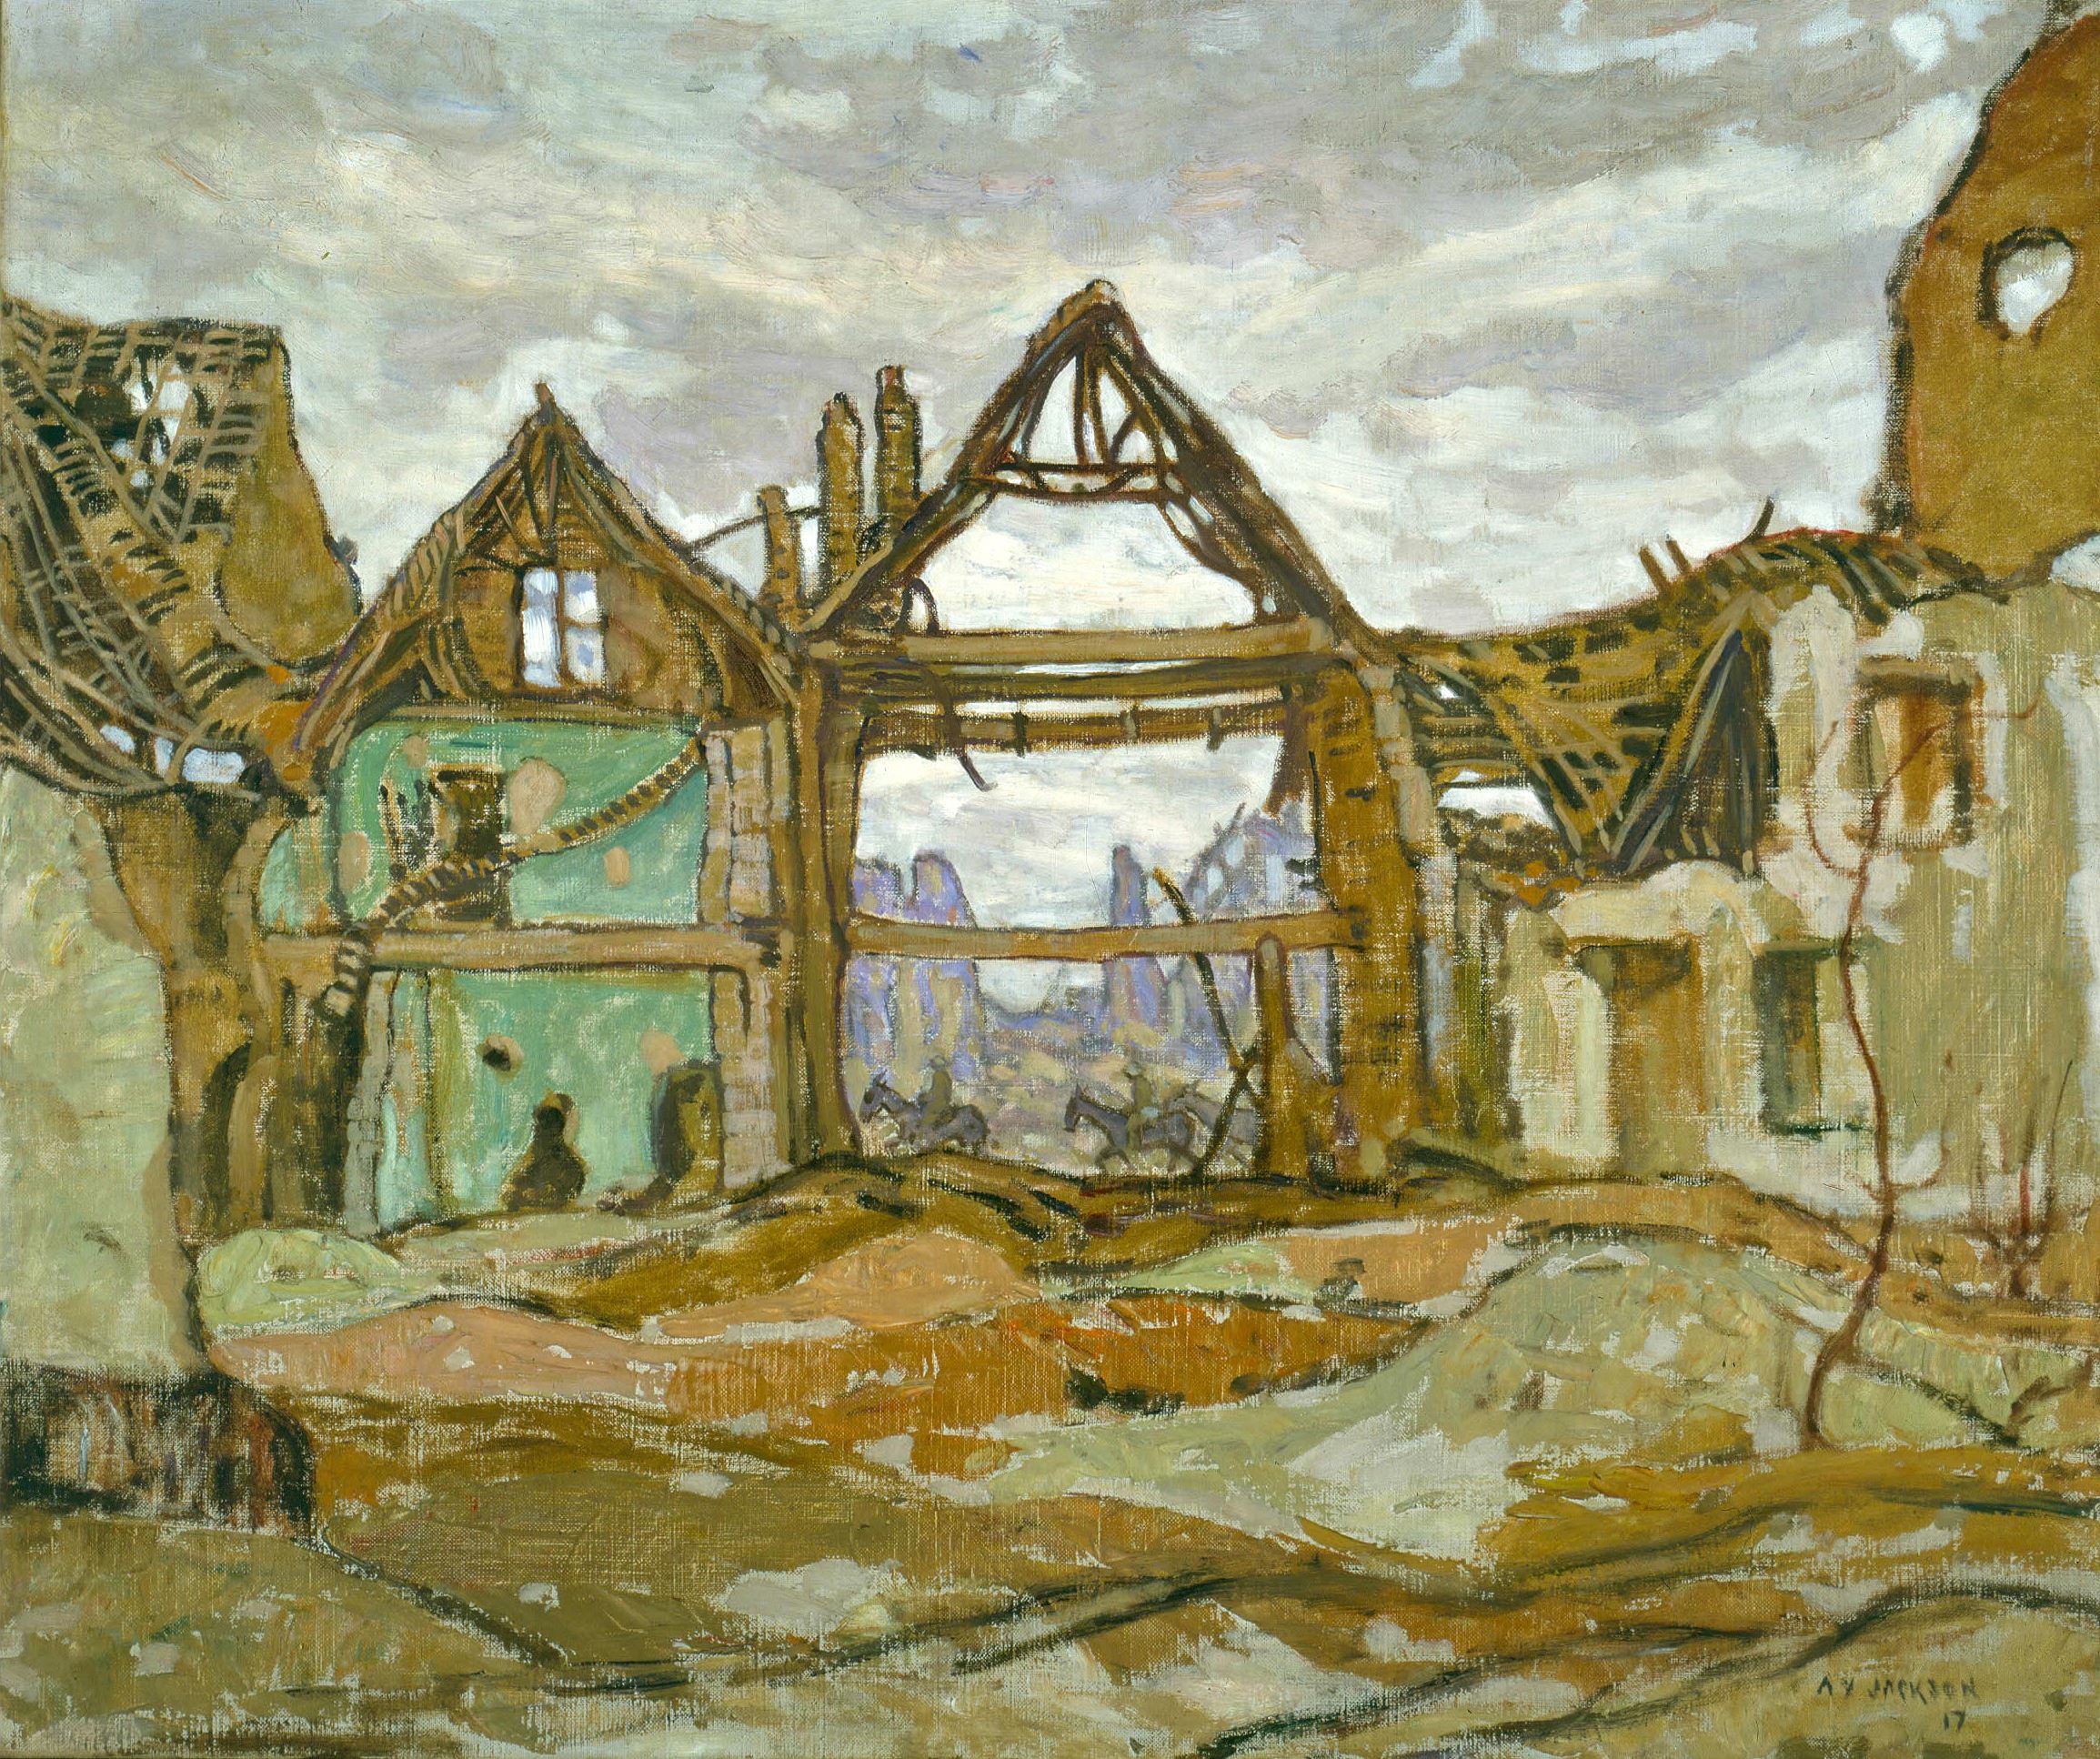 The Group of Seven, Canada’s Impressionist Movement